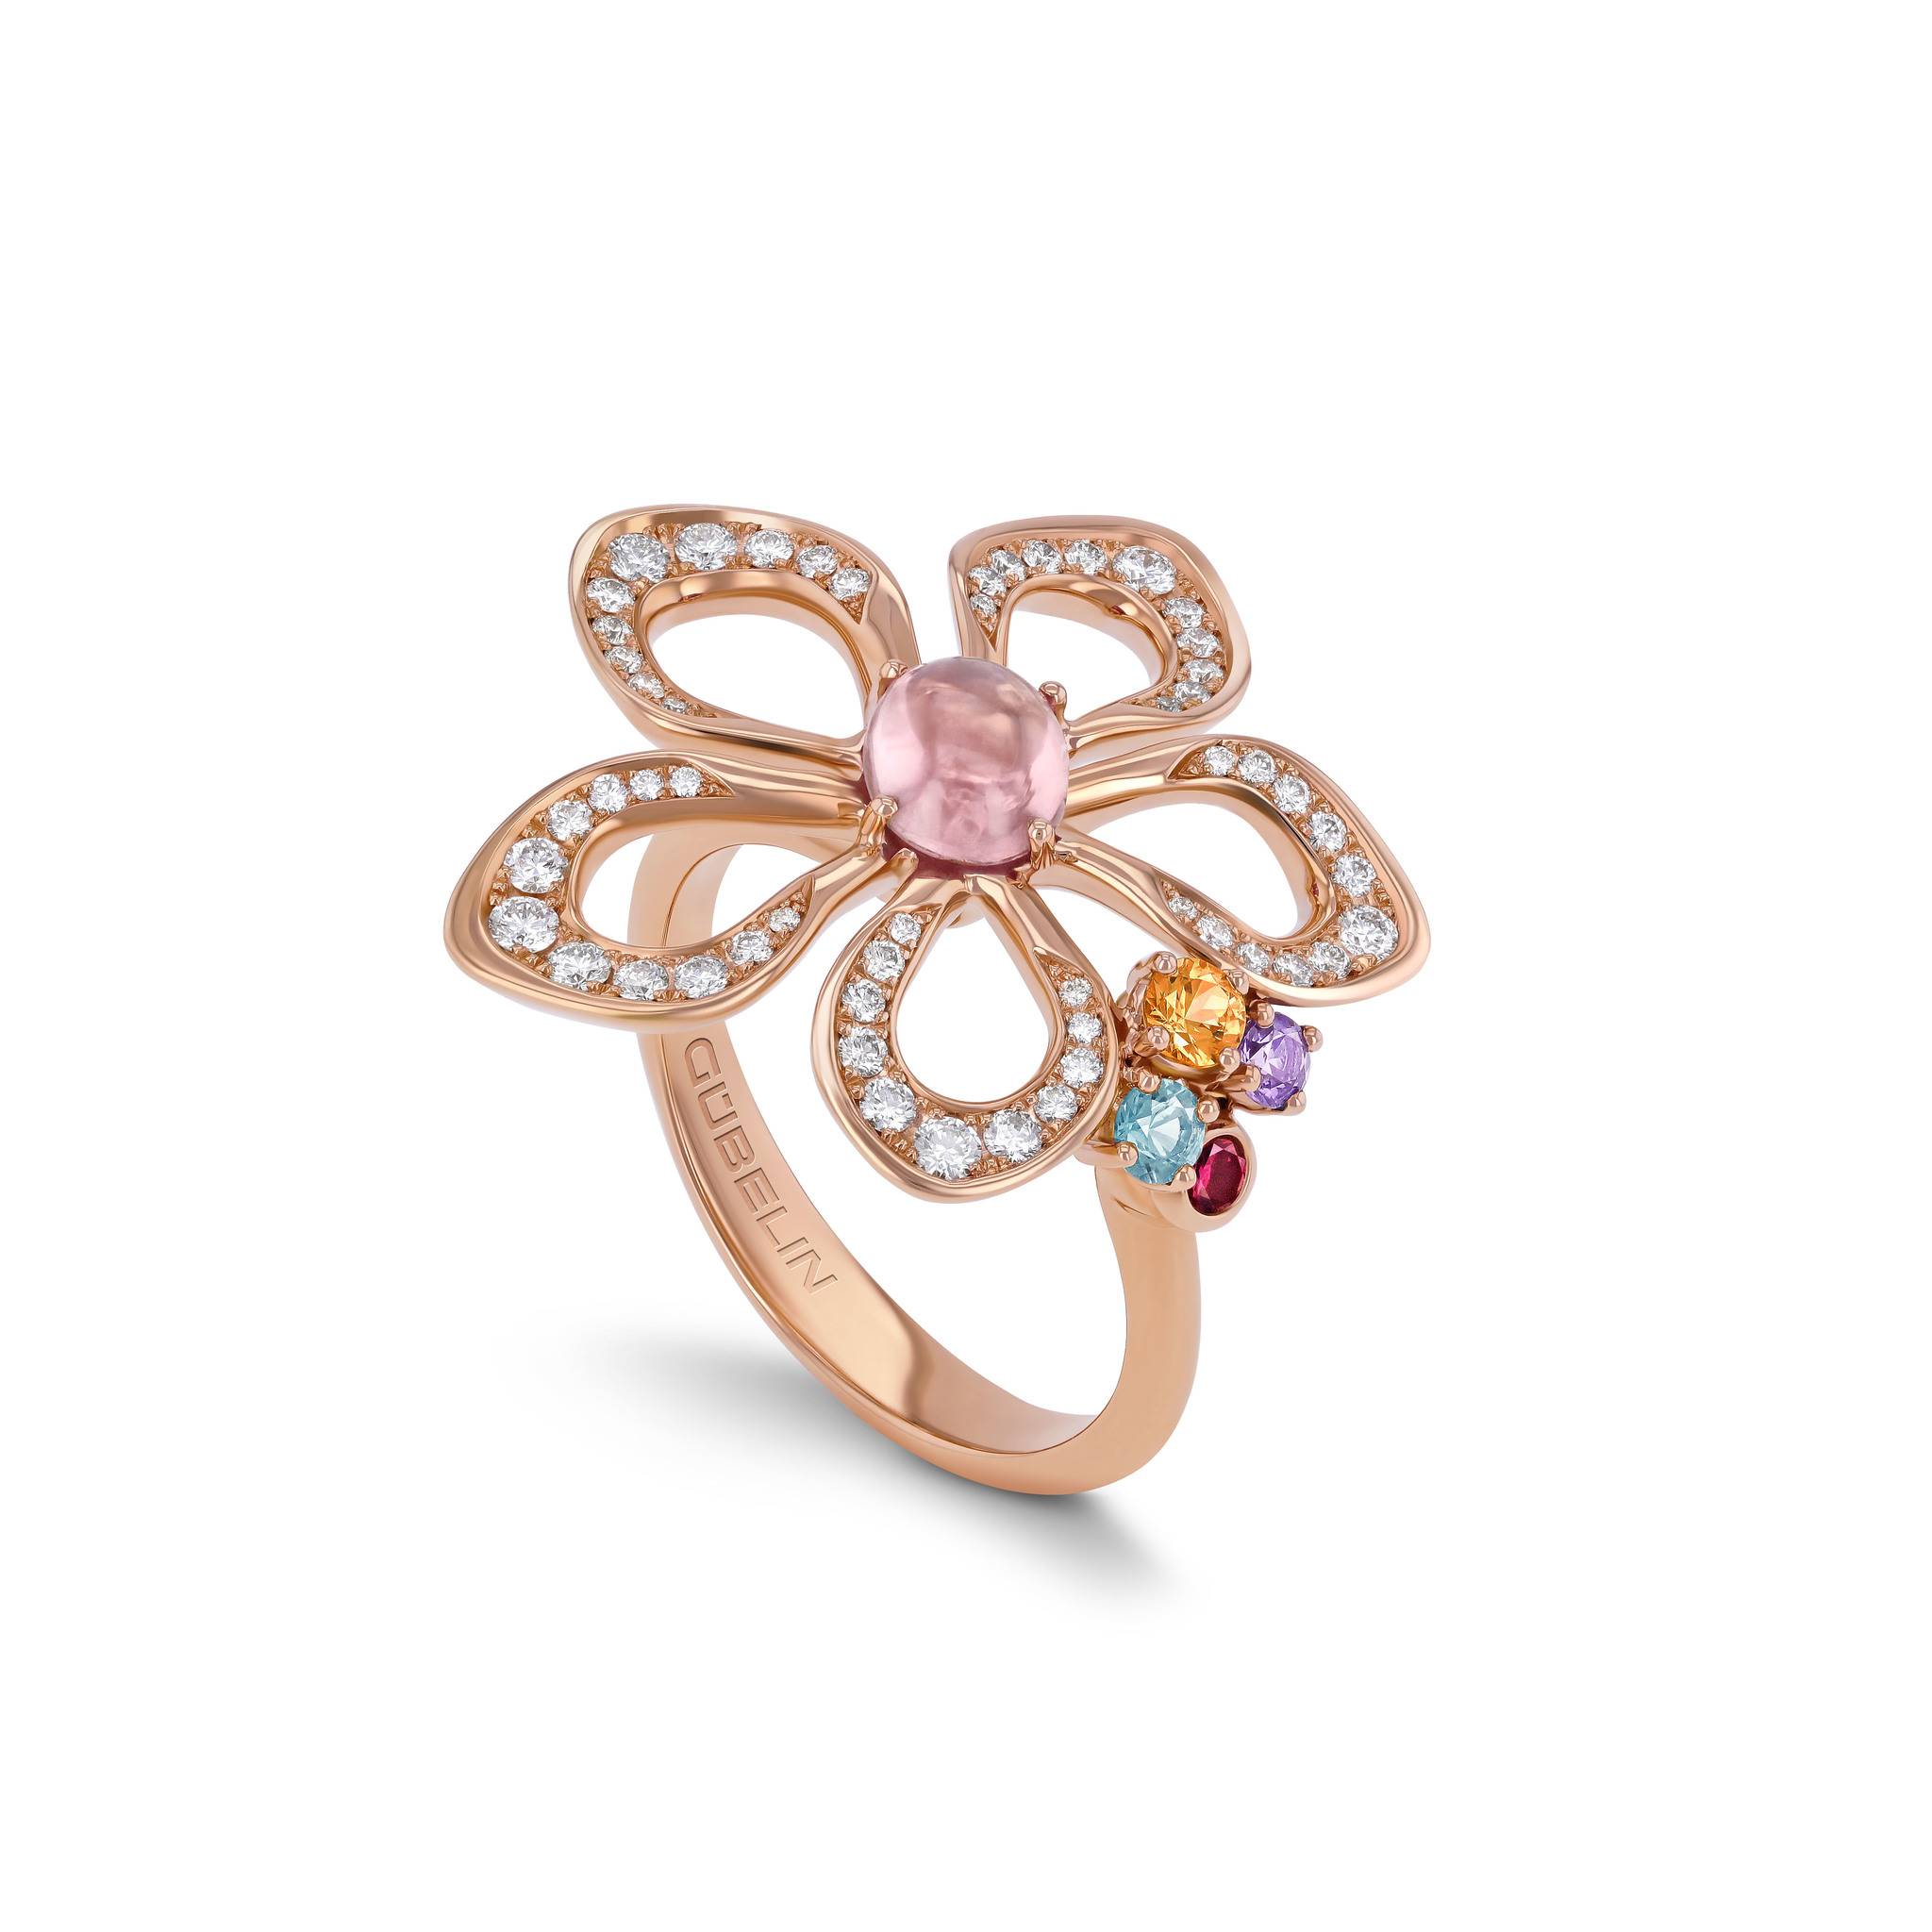 Ring with morganite